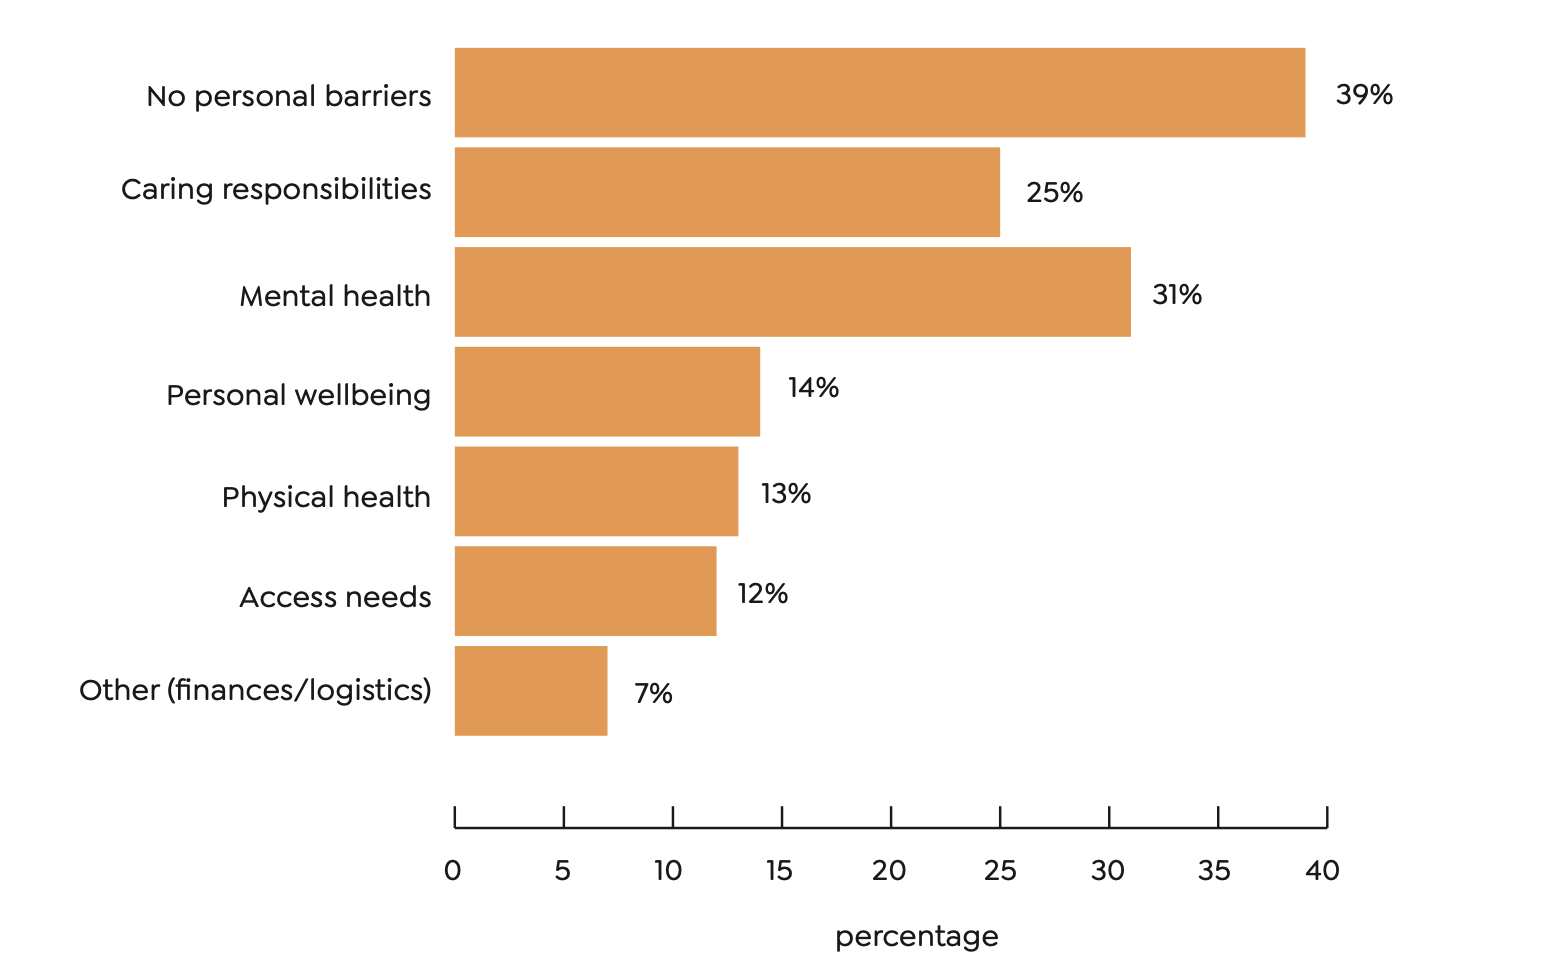 No personal barriers: 39%
Caring responsibilities: 25%
Mental health: 31%
Personal wellbeing: 14%
Physical health: 13%
Access needs: 12%
Other (financial/logistics): 7%